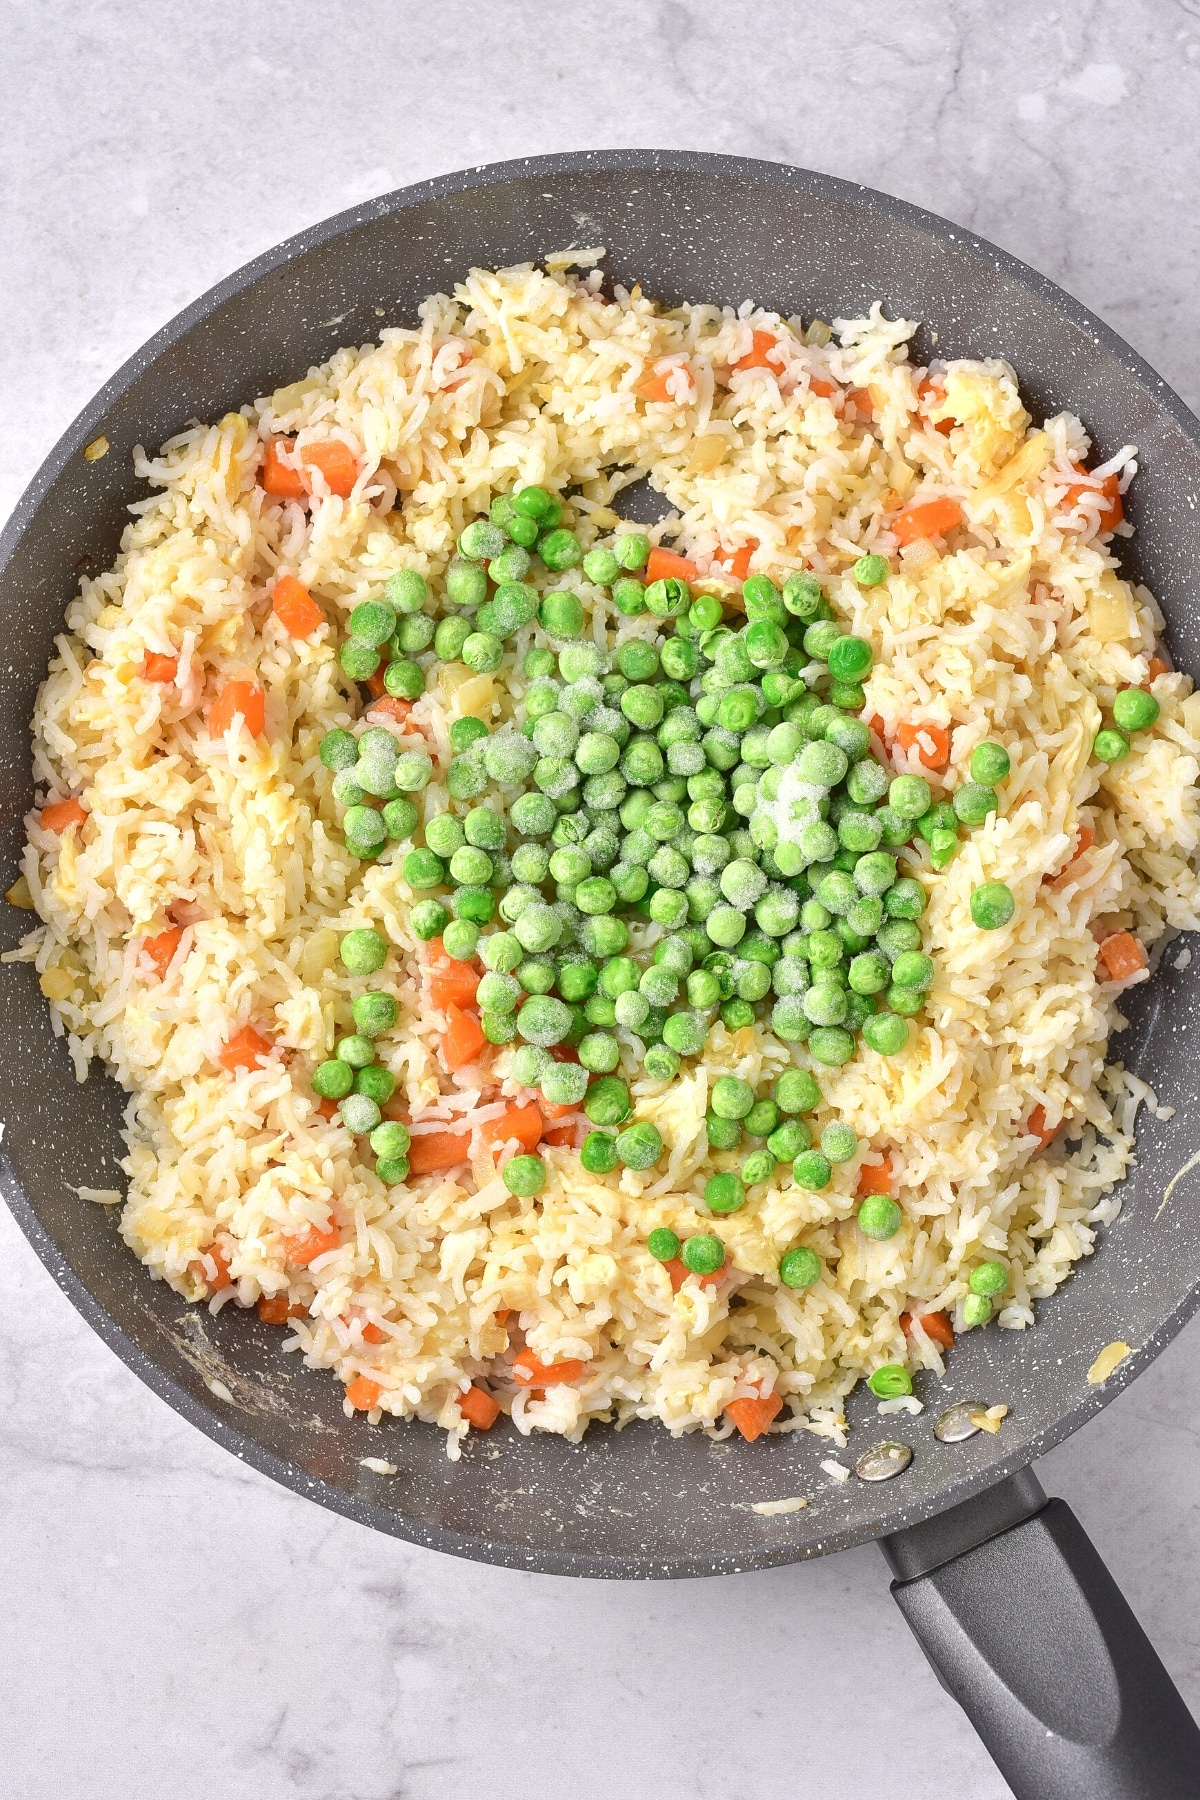 Frozen peas on top of a skillet of gluten-free fried rice.